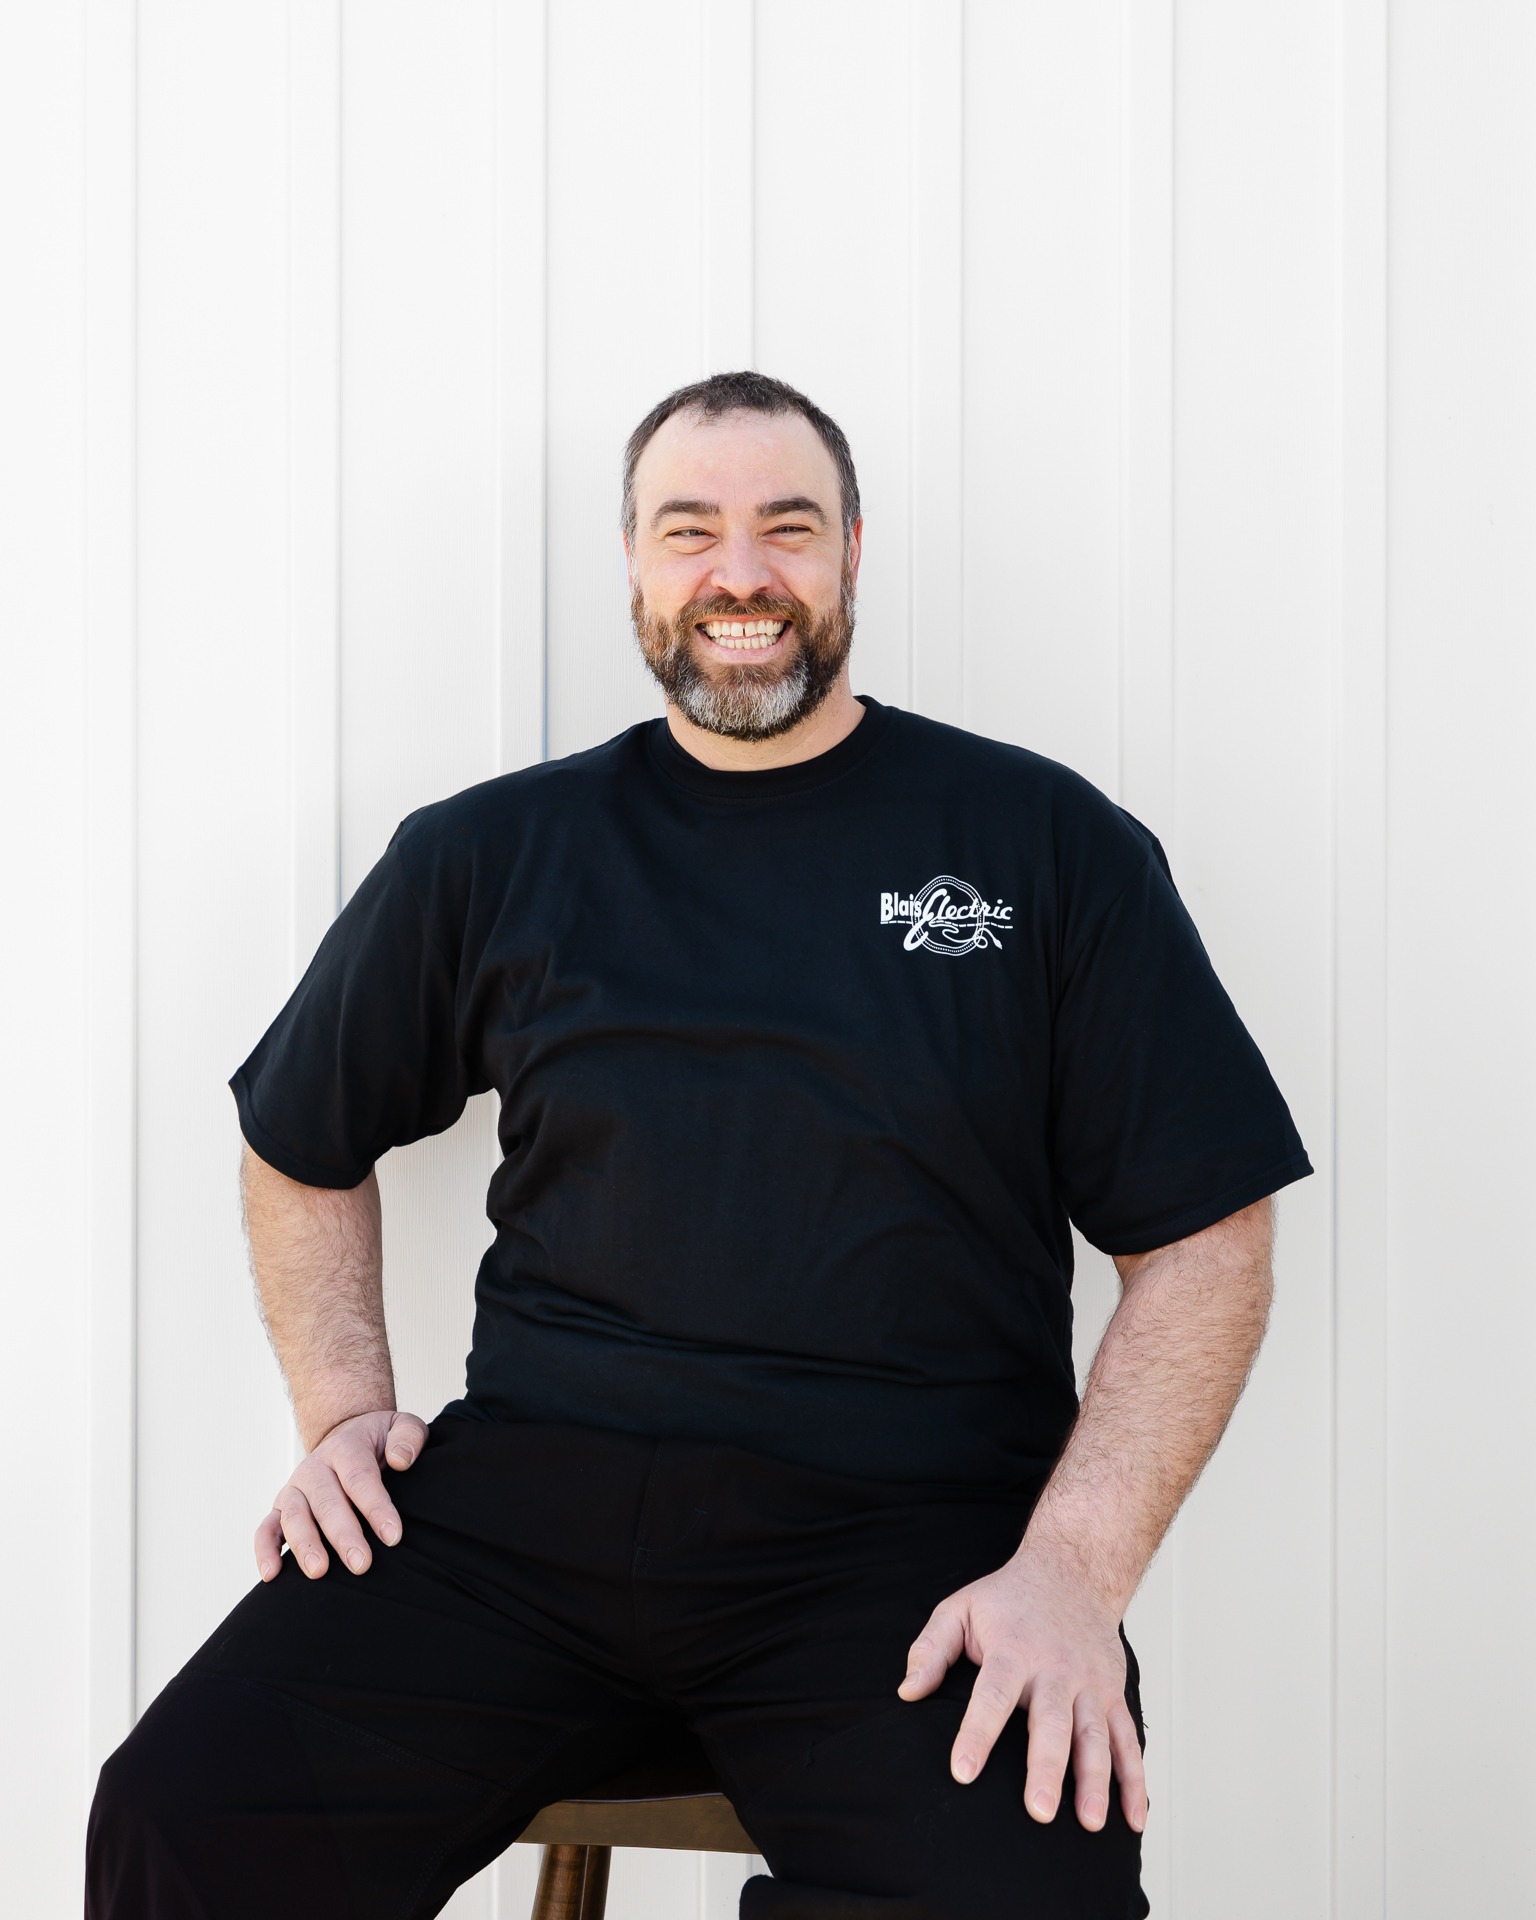 A person with a beard smiles, sitting relaxed on a stool, wearing a black T-shirt with a logo, against a white vertical siding background.